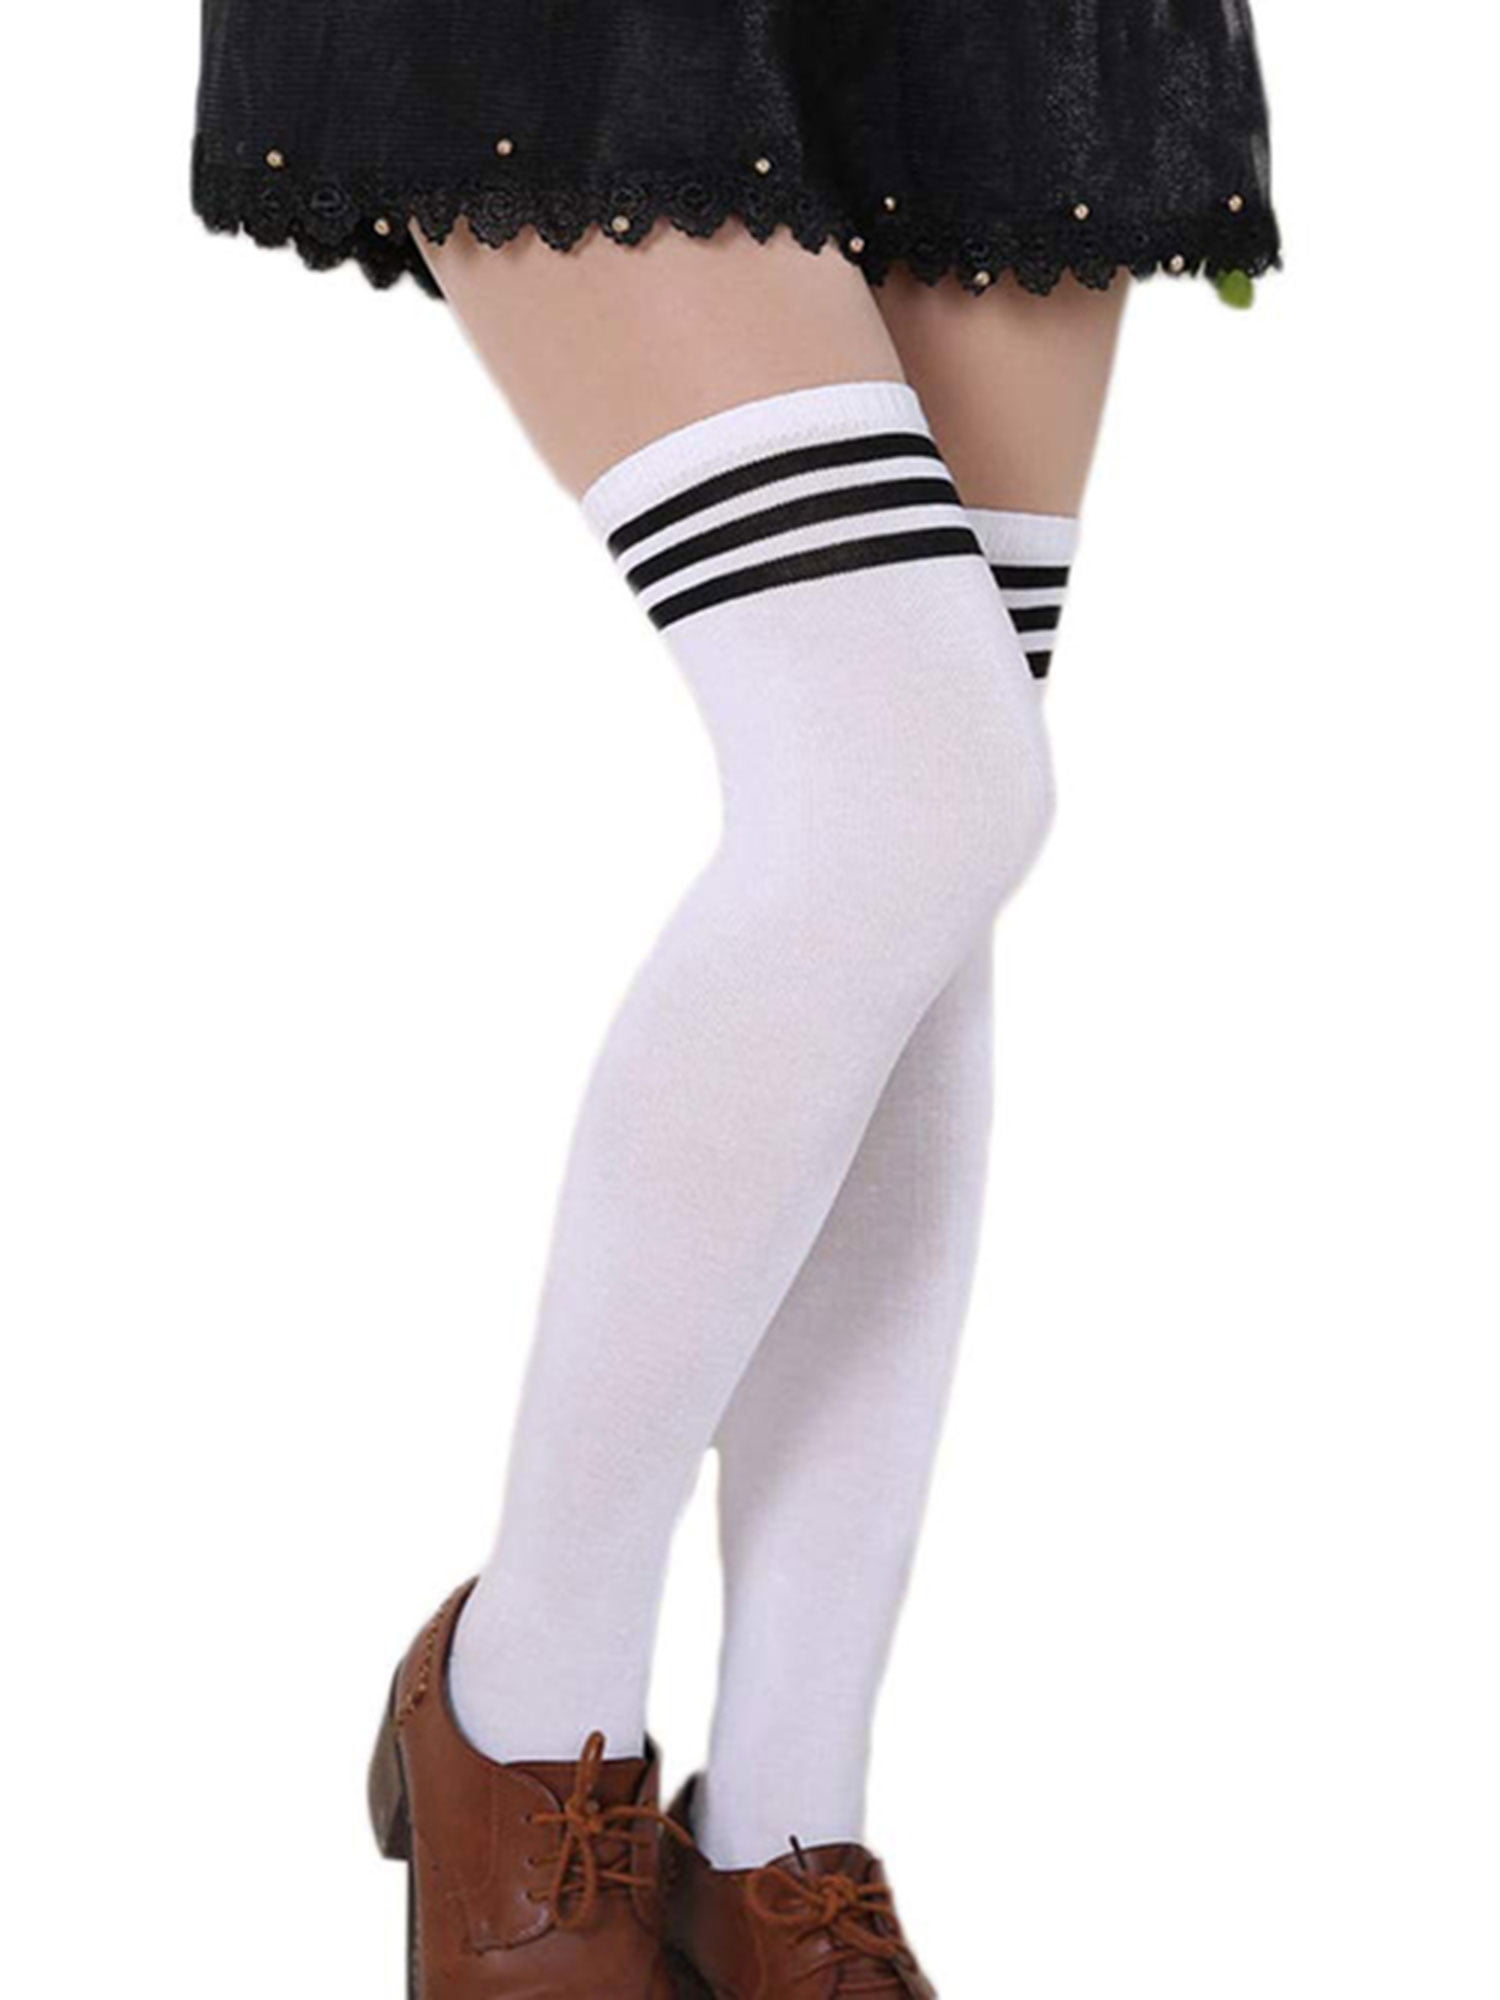 OVER THE KNEE HIGH SOCKS PURPLE ADULT SCHOOLGIRL SOFT STRETCHY 80% COTTON 